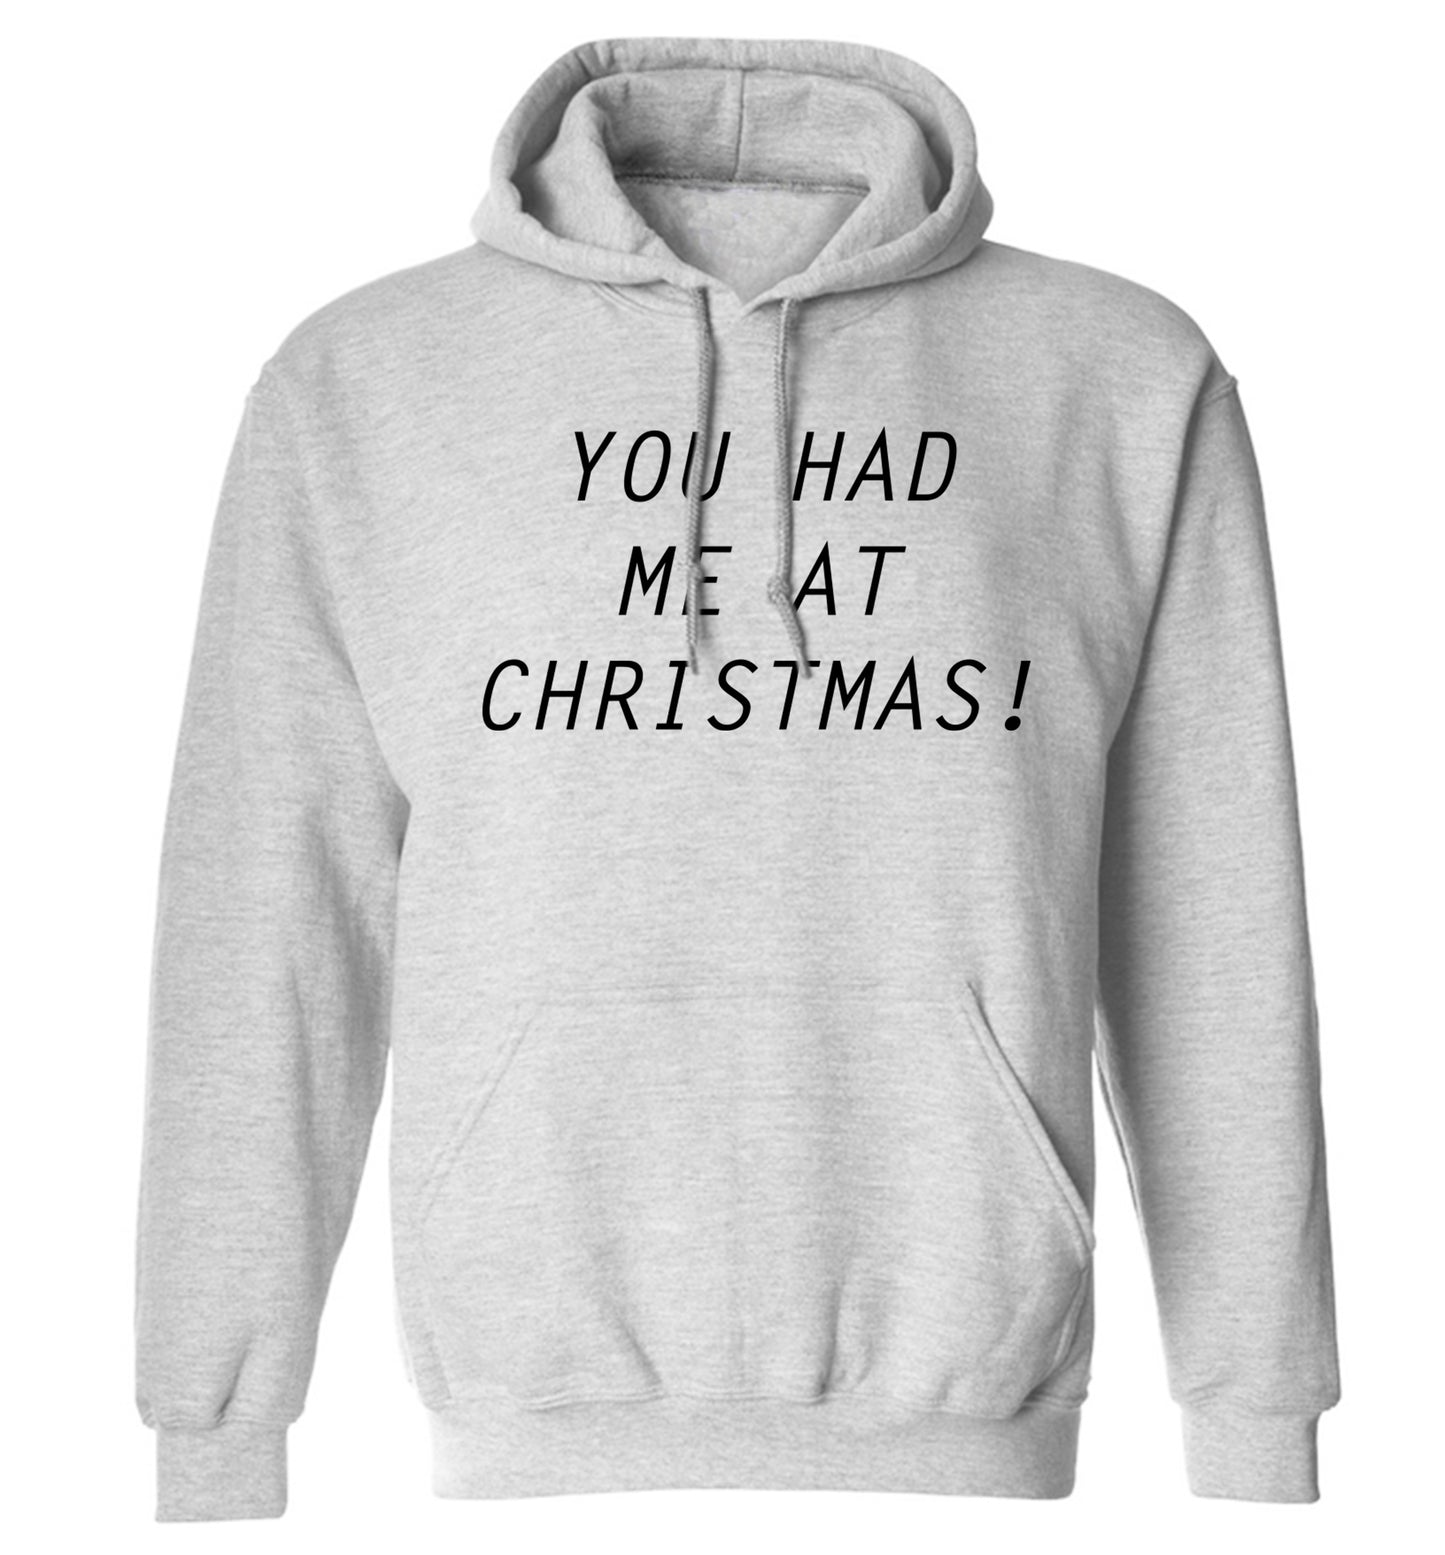 You had me at Christmas adults unisex grey hoodie 2XL